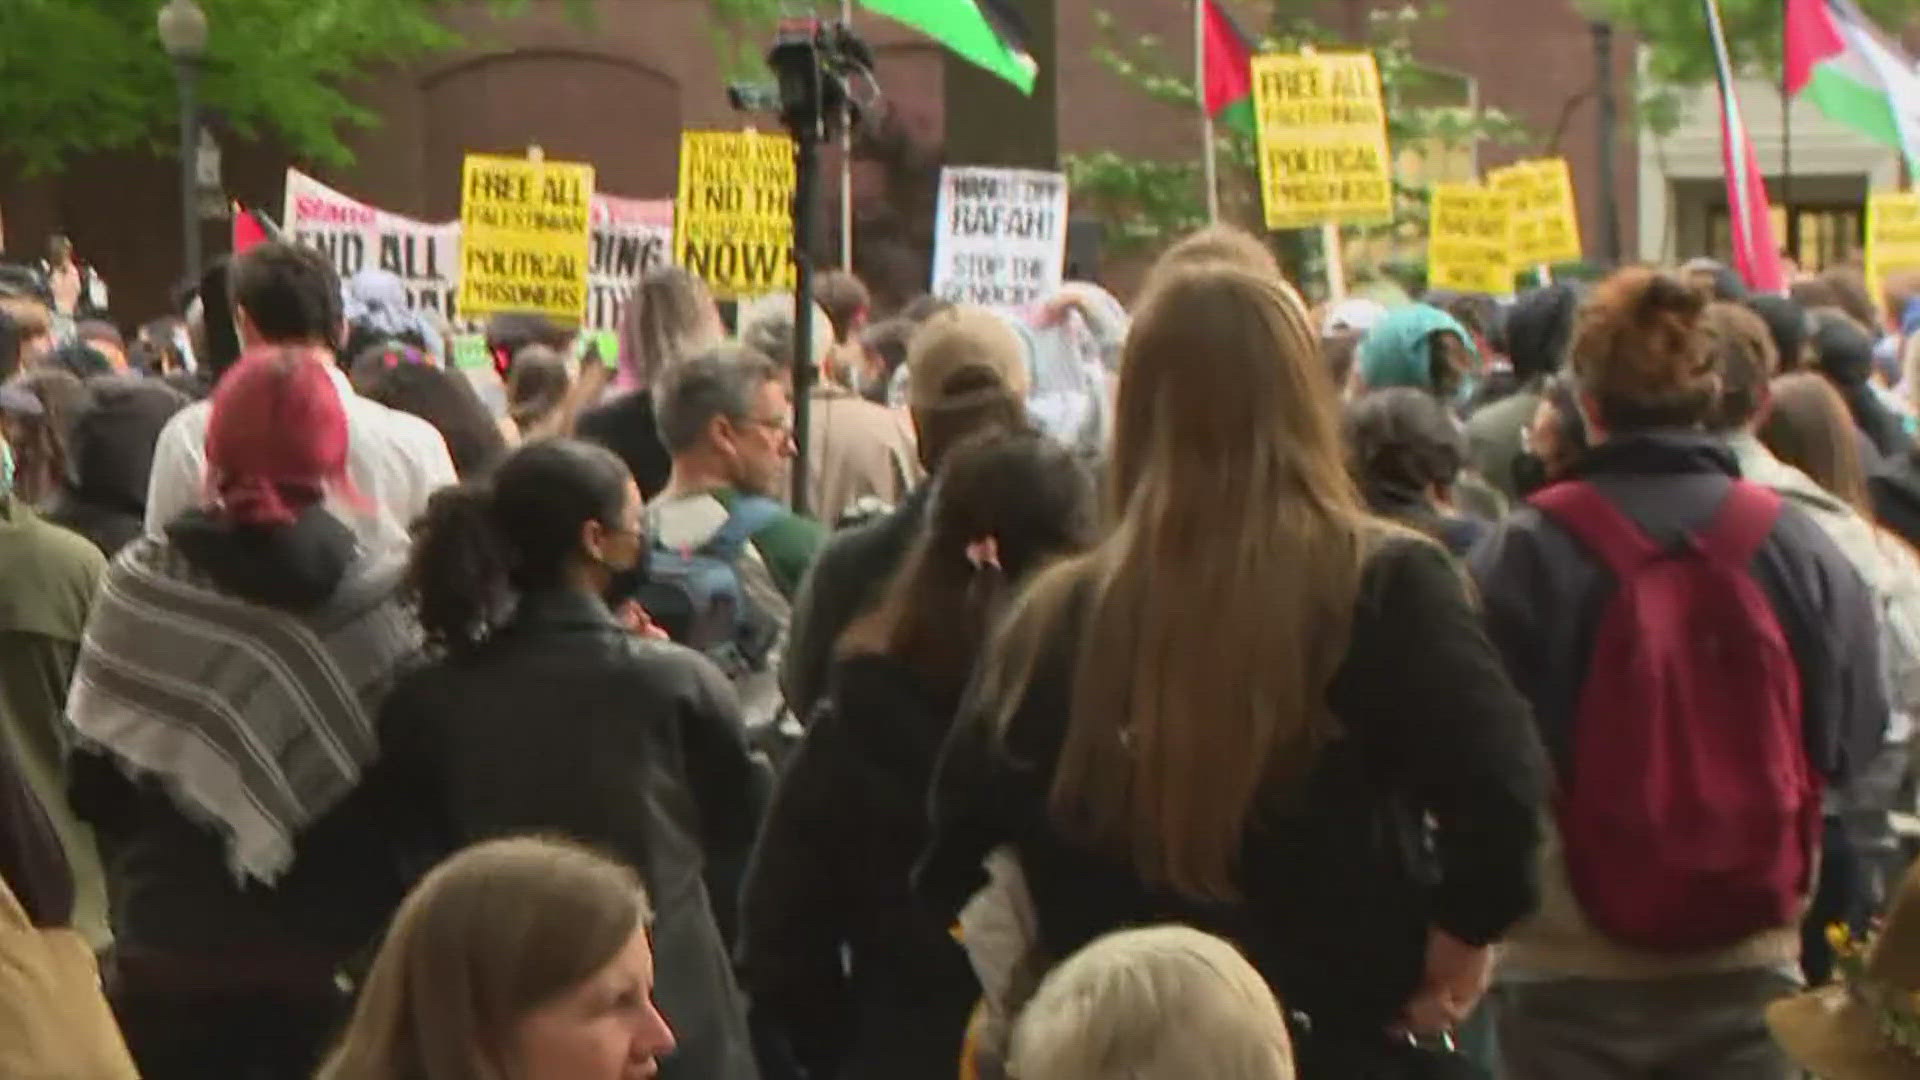 Students from several DMV-area schools gathered on campus for a pro-Palestine demonstration Friday.